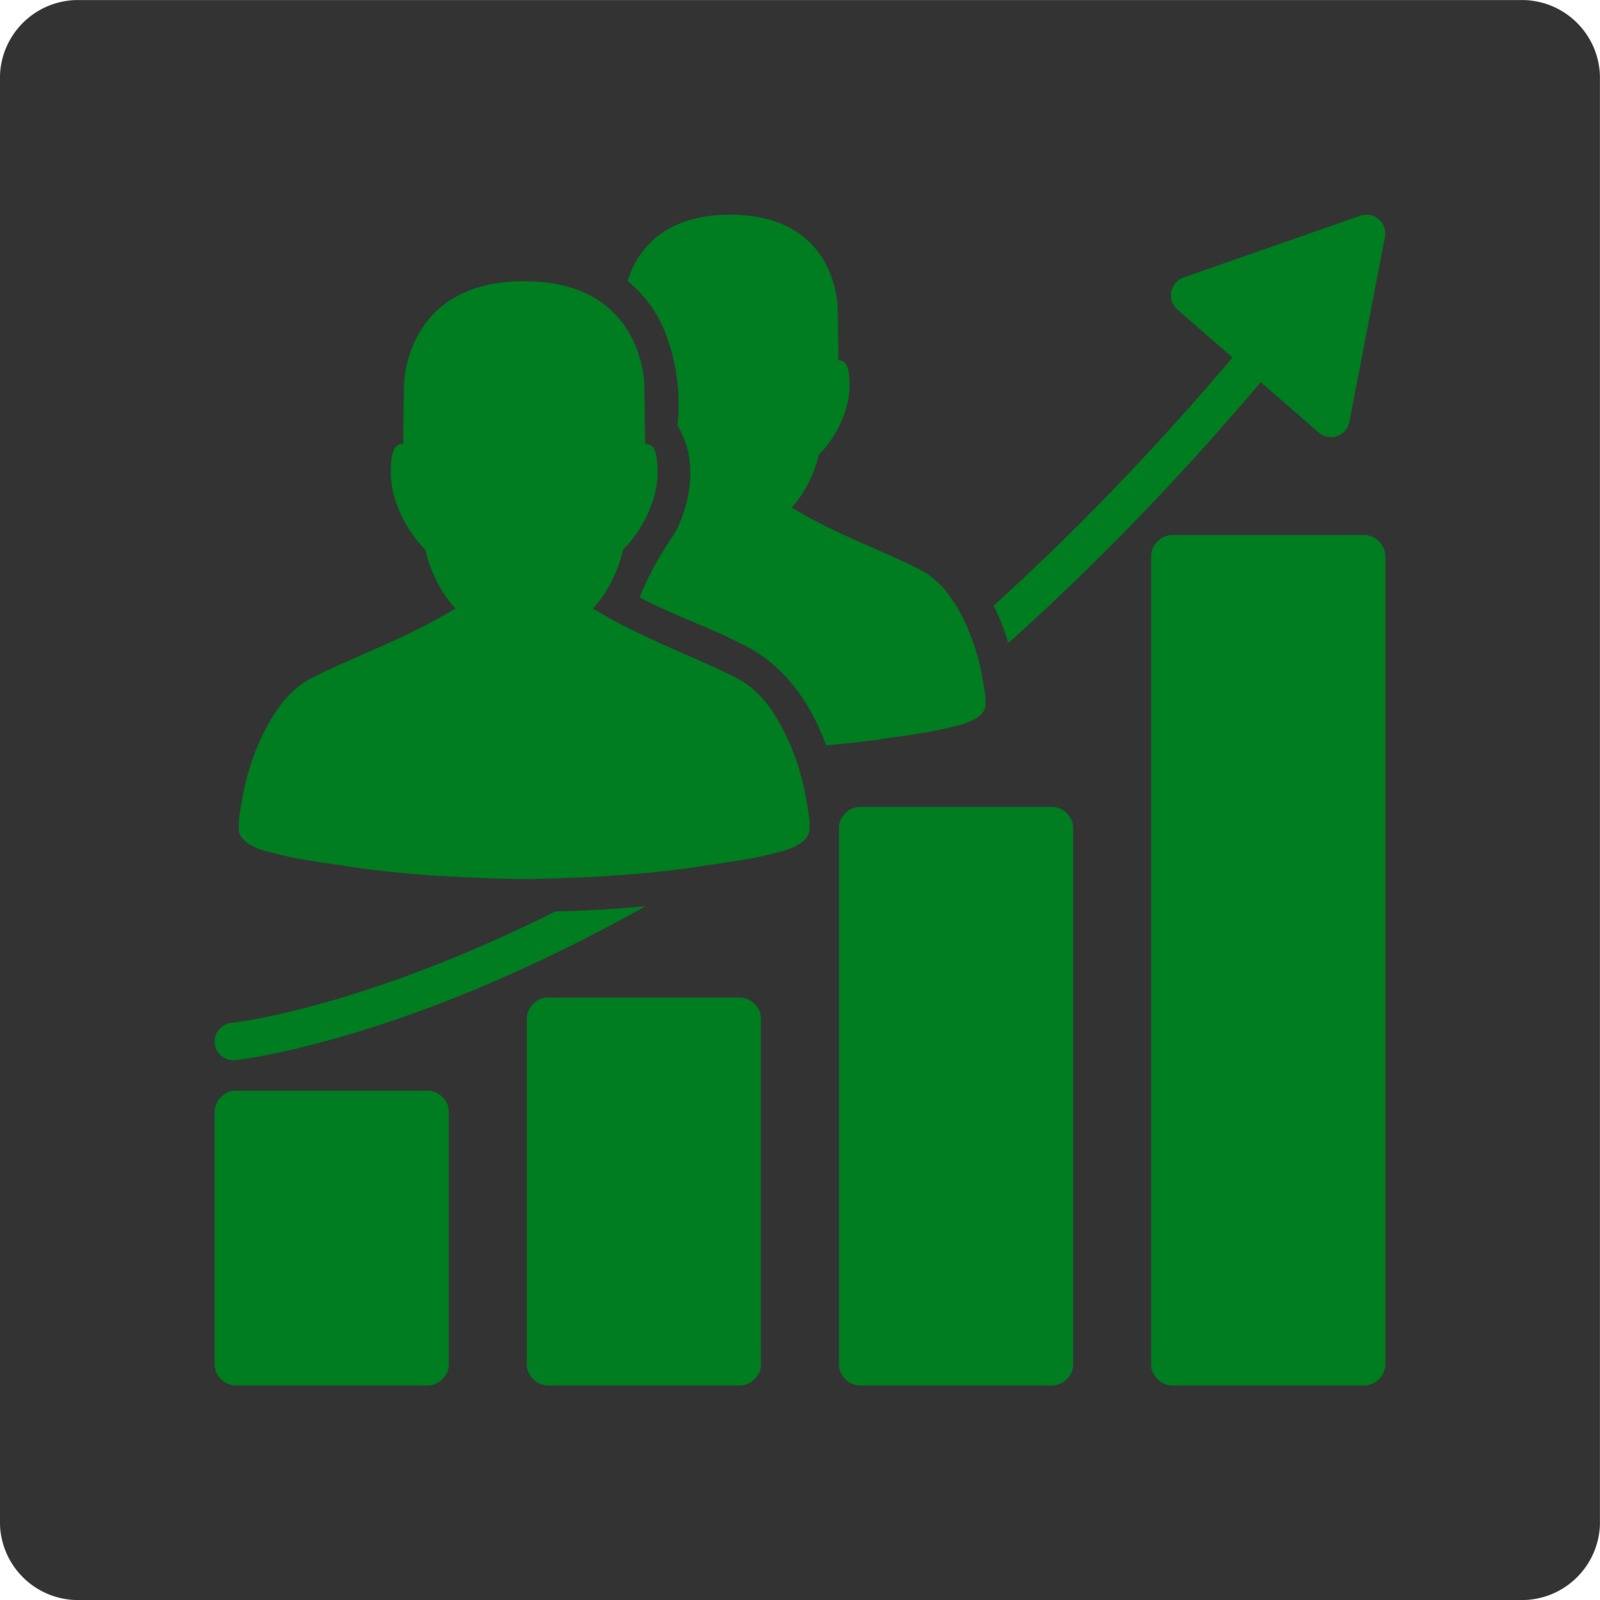 Audience Growth vector icon. This flat rounded square button uses green and gray colors and isolated on a white background.